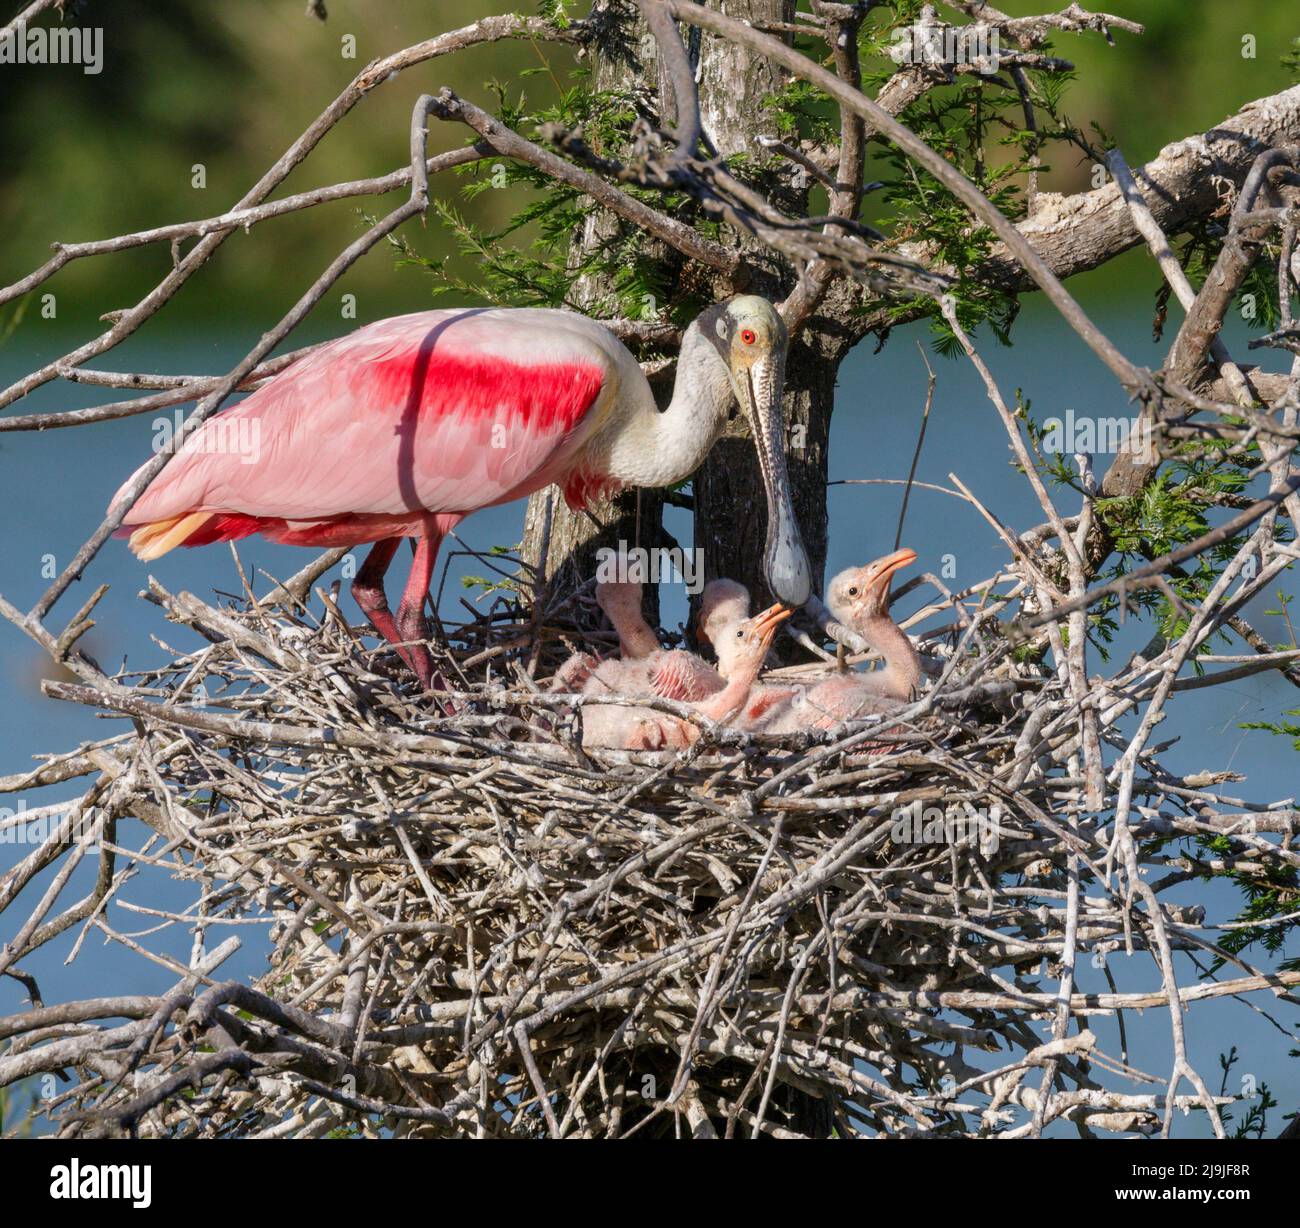 Roseate spoonbill (Platalea ajaja) at the nest with young chicks, High Island, Texas, USA. Stock Photo